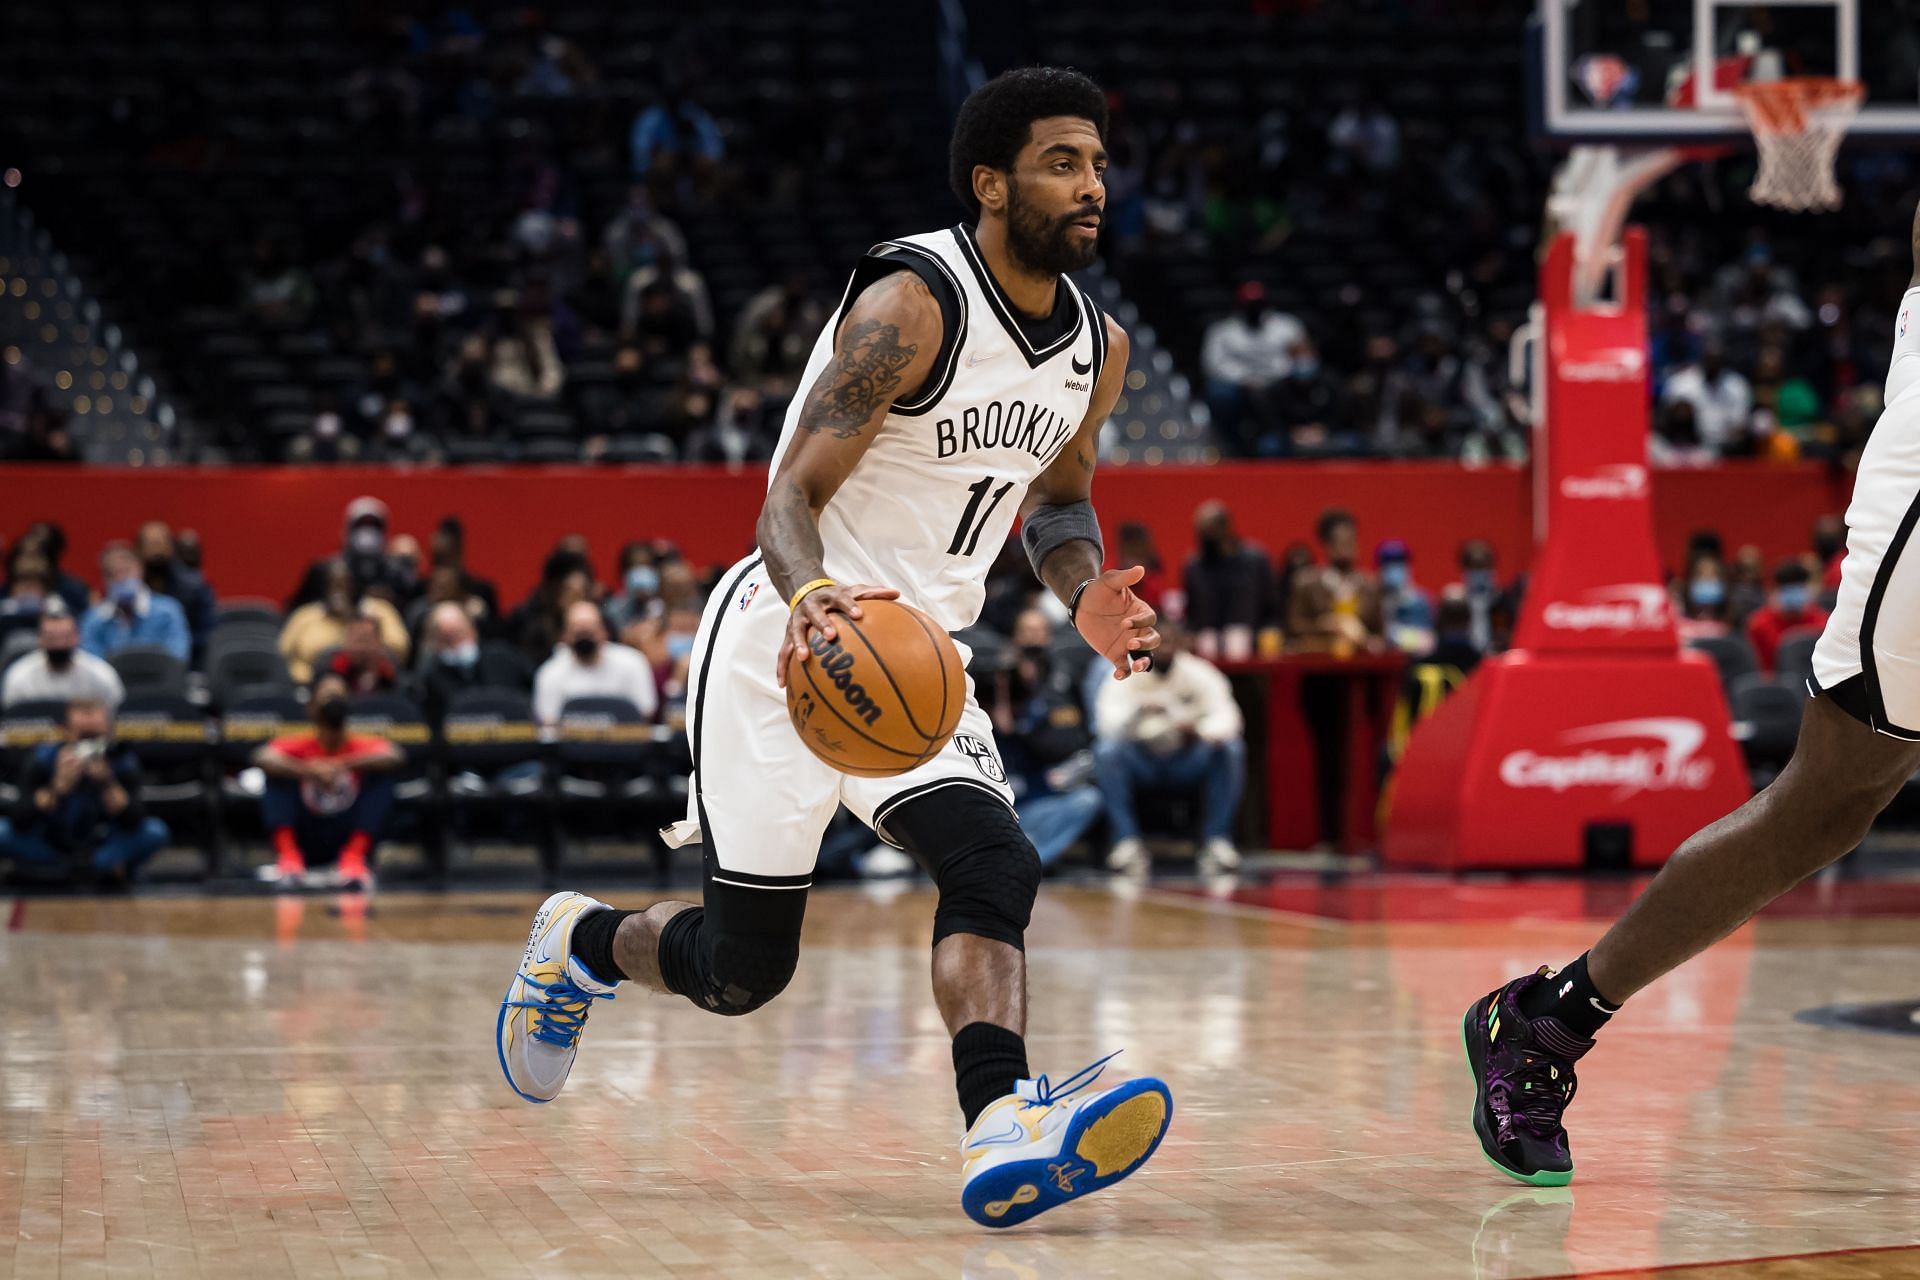 Kyrie Irving of the Brooklyn Nets dribbles against the Washington Wizards on Wednesday in Washington, DC.